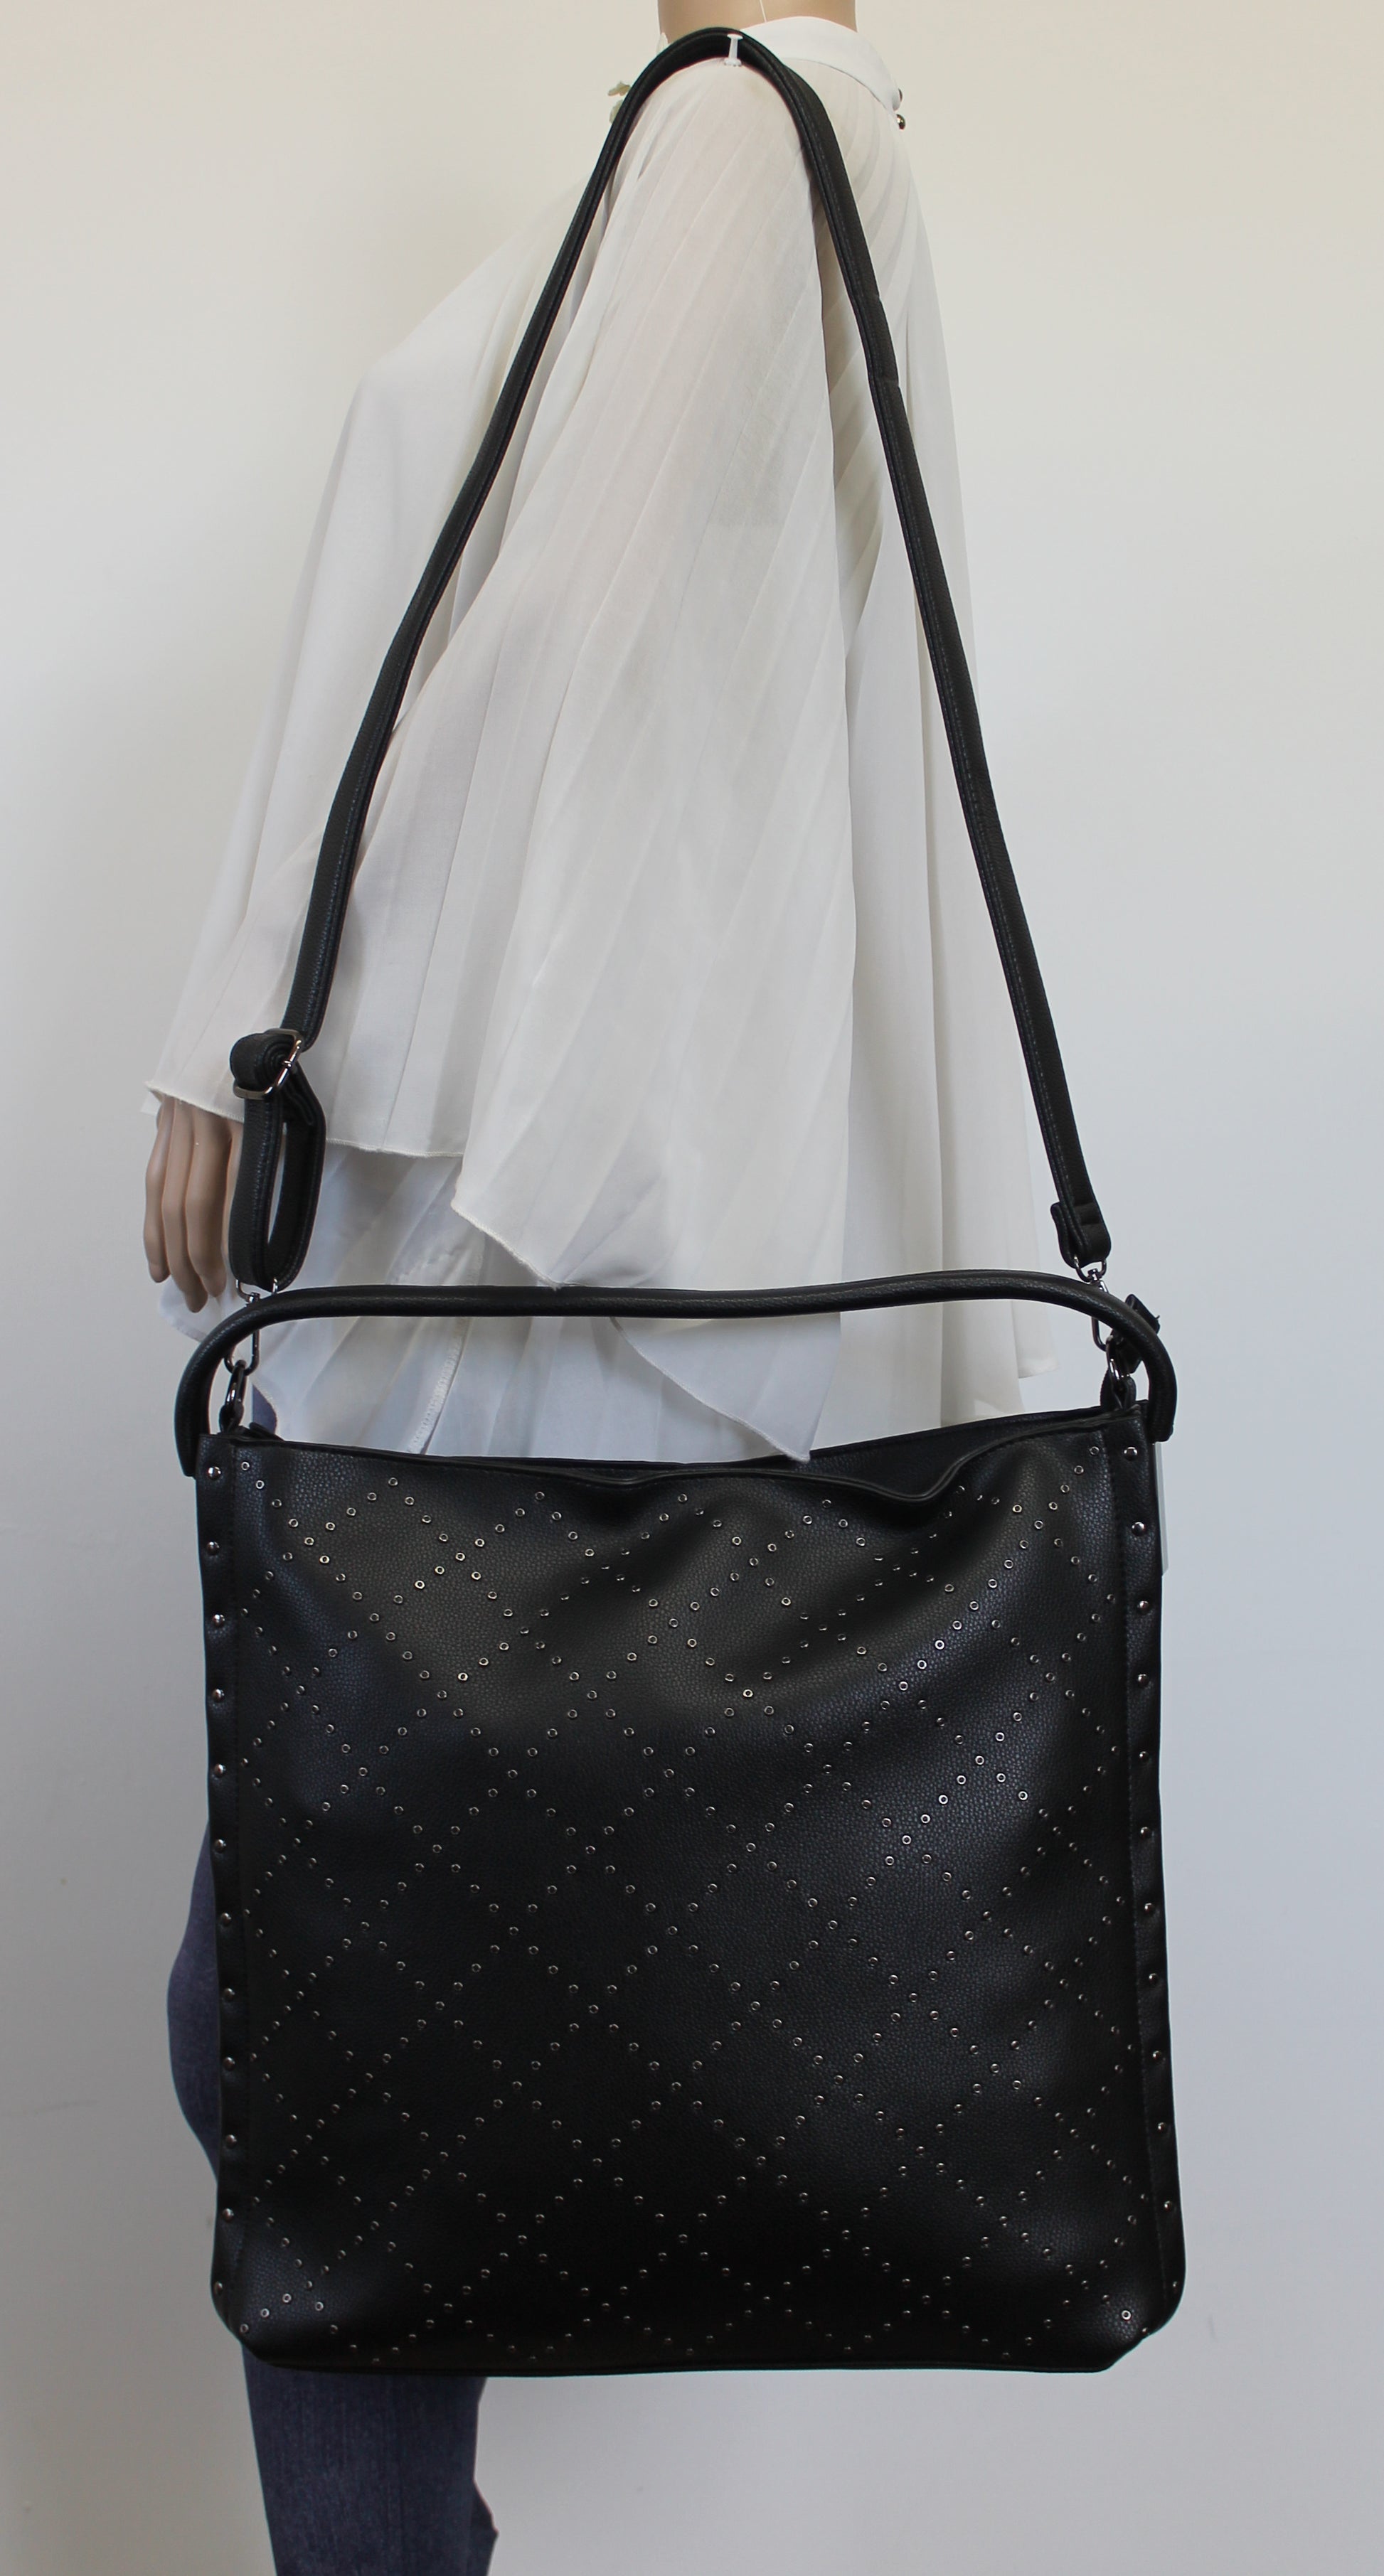 Buy your Alina Handbag Black Today! Buy with confidence from Swankyswans